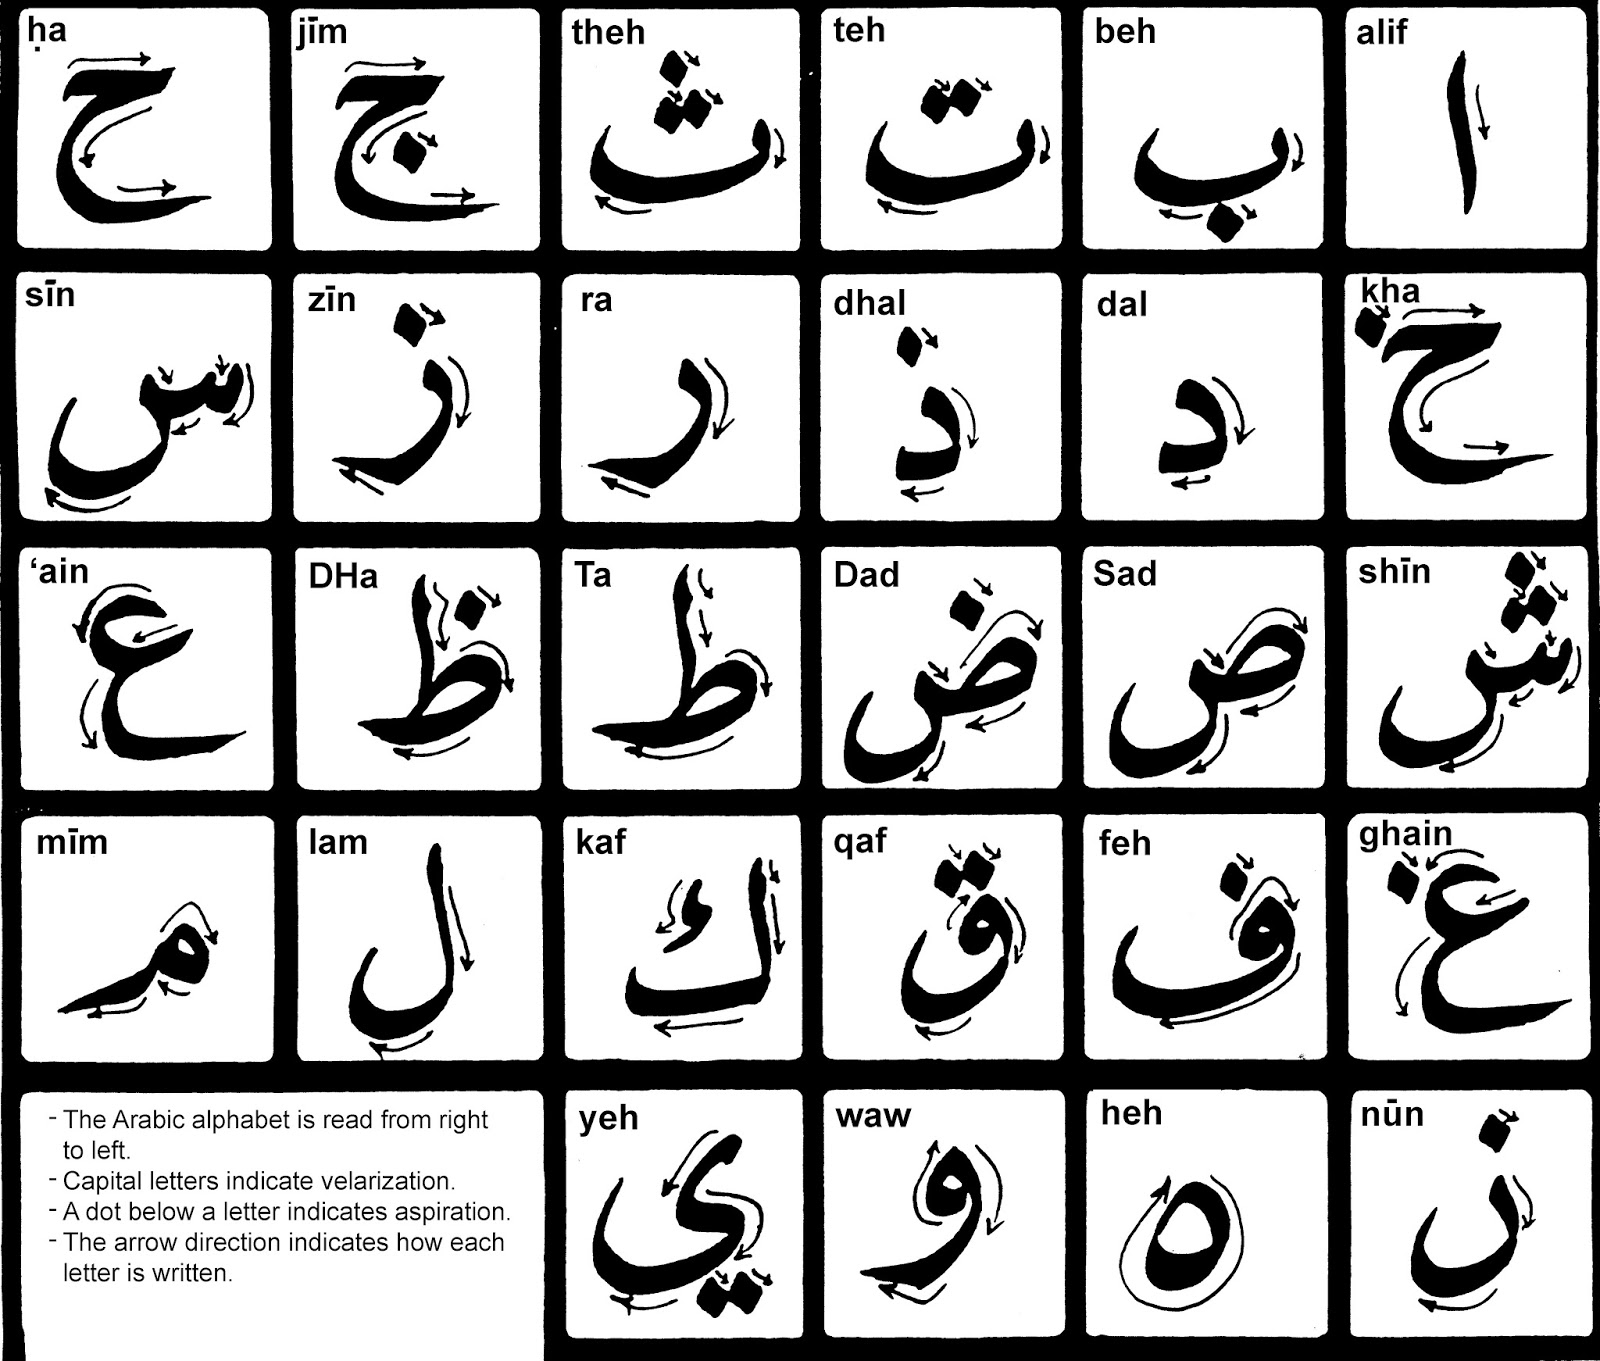 Arabic Alphabet Letters in English Image